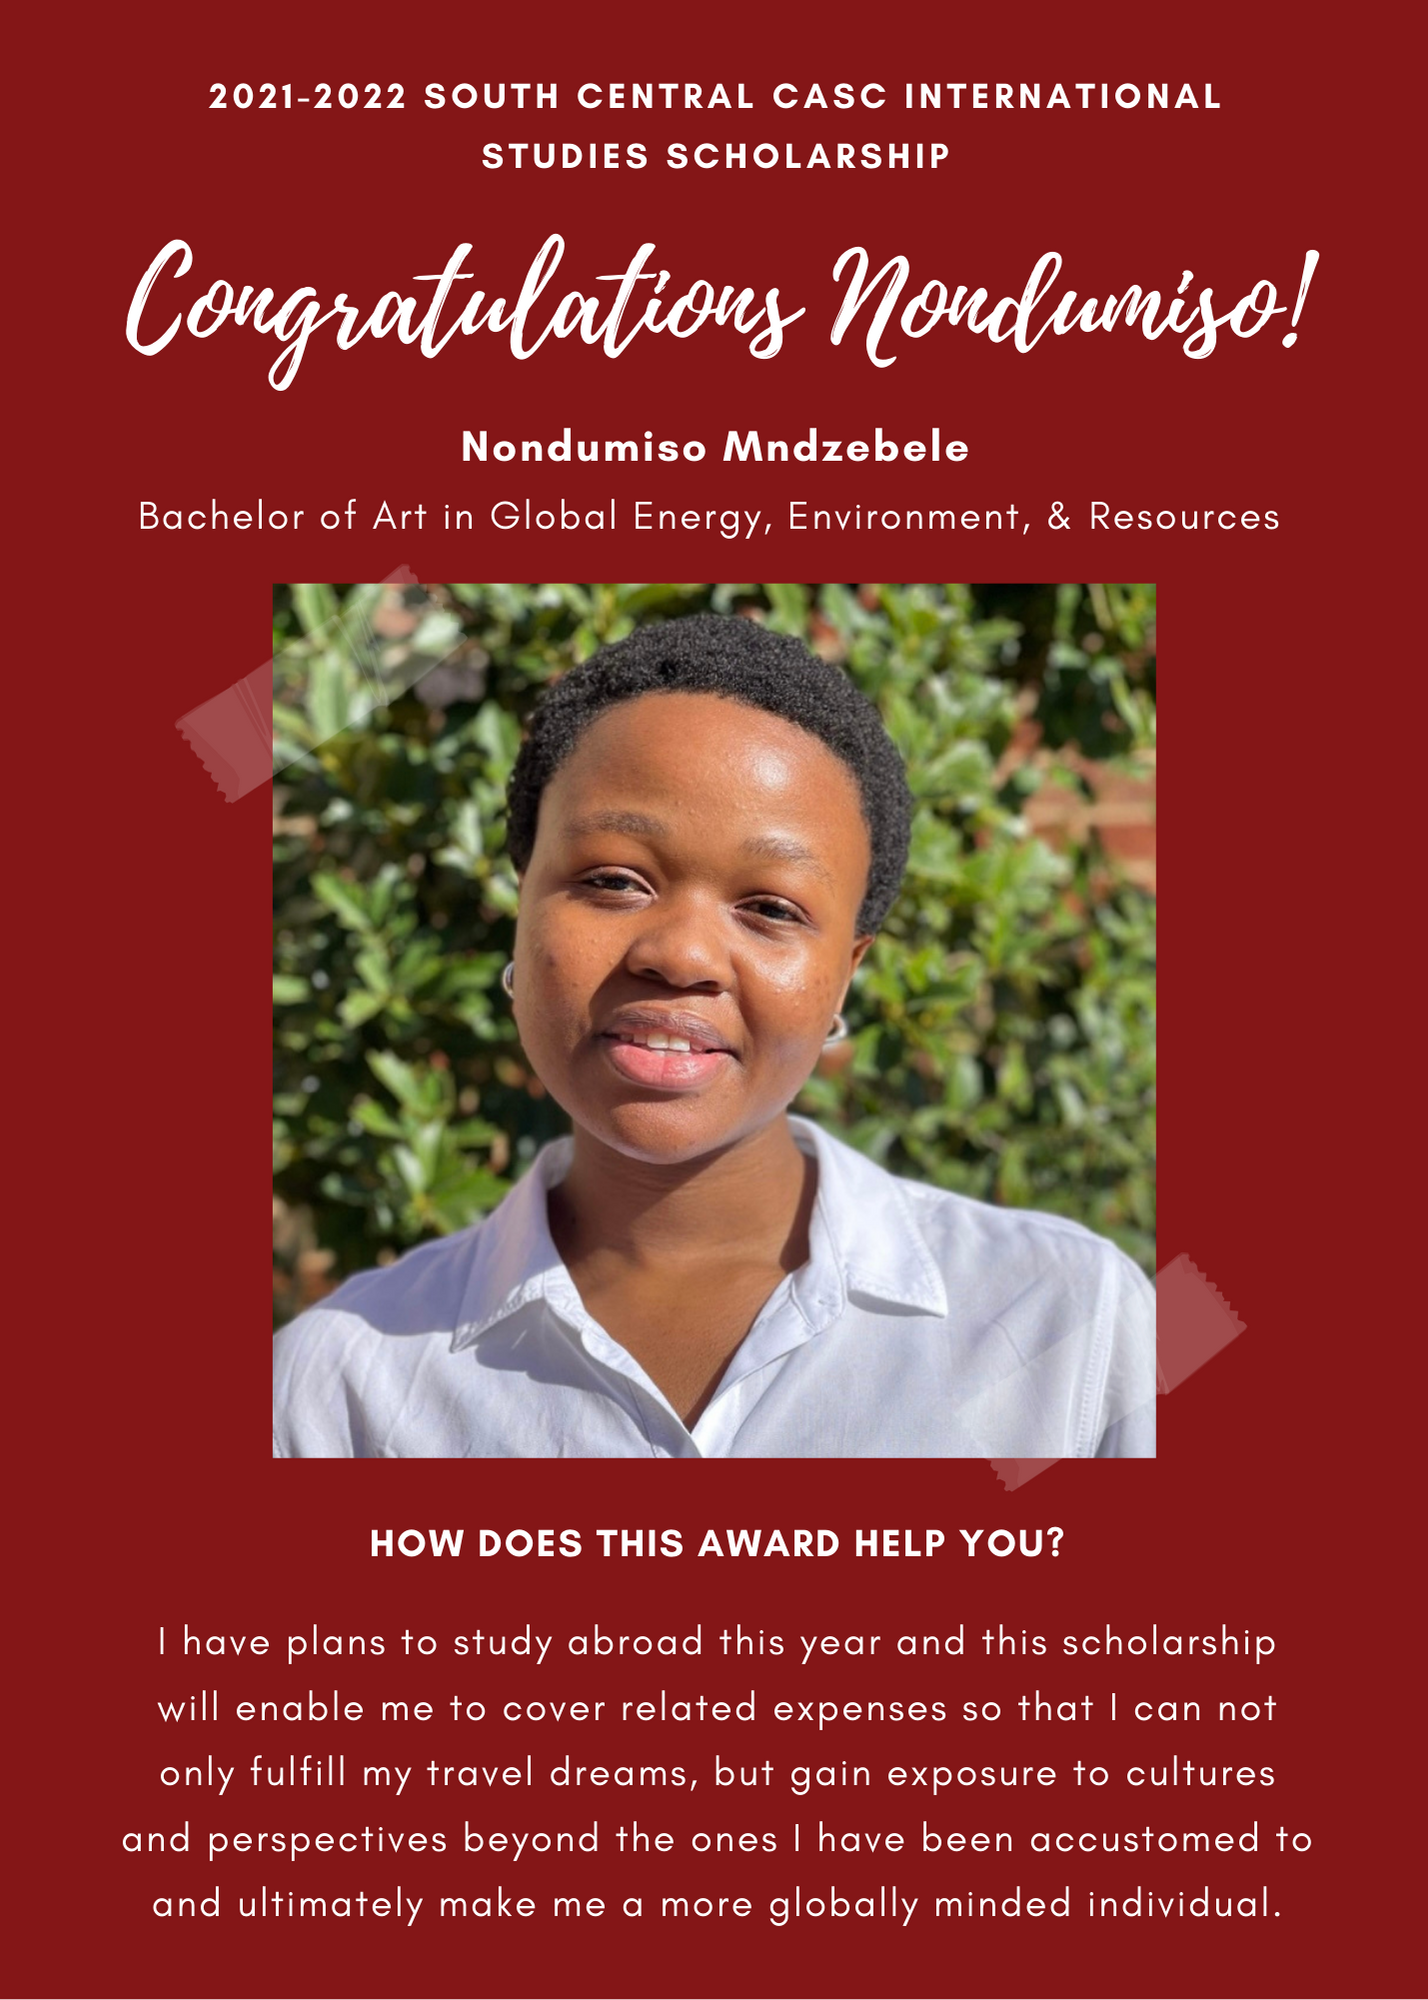 2021 -2022 A&GS South Central CASC International Studies Scholarship Congratulations Nondumiso! Nondumiso Mndzebele Bachelor of Art in Global Energy, Environment, and Resources. How does this award help you? I have plans to study abroad this year and this scholarship will enable me to cover related expenses so that I can not only fulfill my travel dreams, but gain exposure to cultures and perspectives beyond the ones I have been accustomed to and ultimately make me a more globally minded individual.